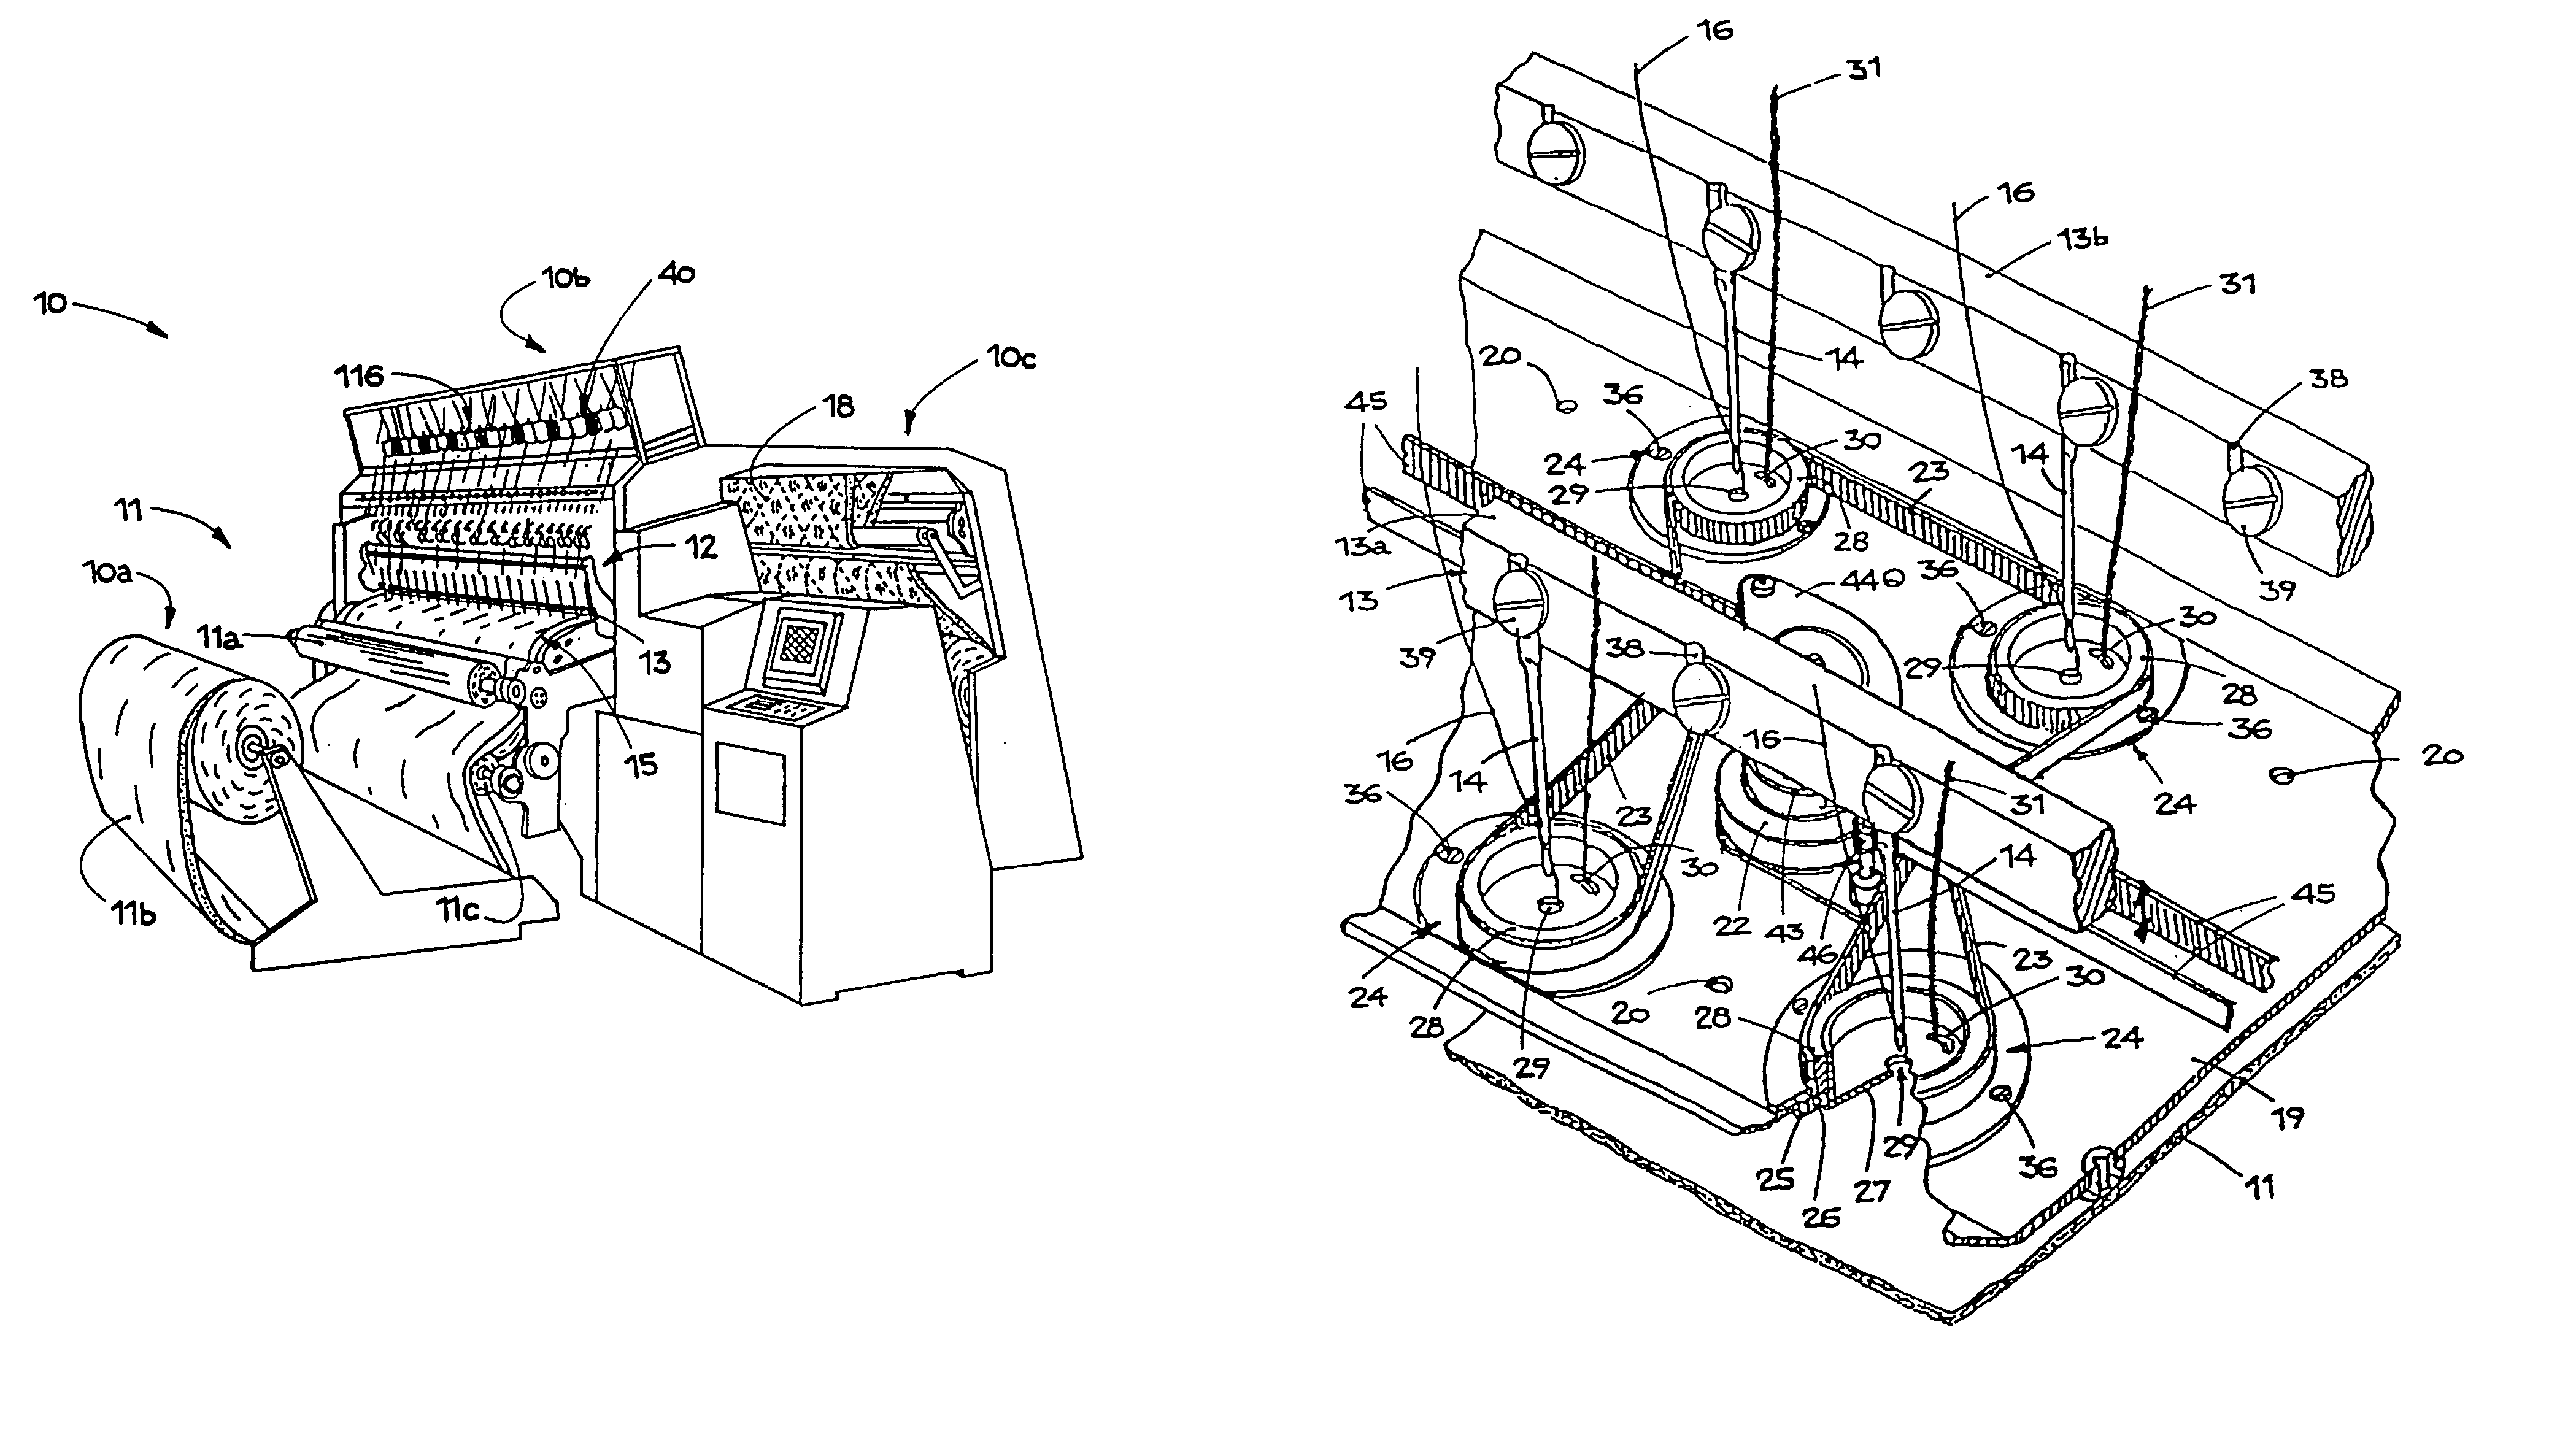 Method and device to apply cord thread or ribbons onto fabrics in a quilting machine